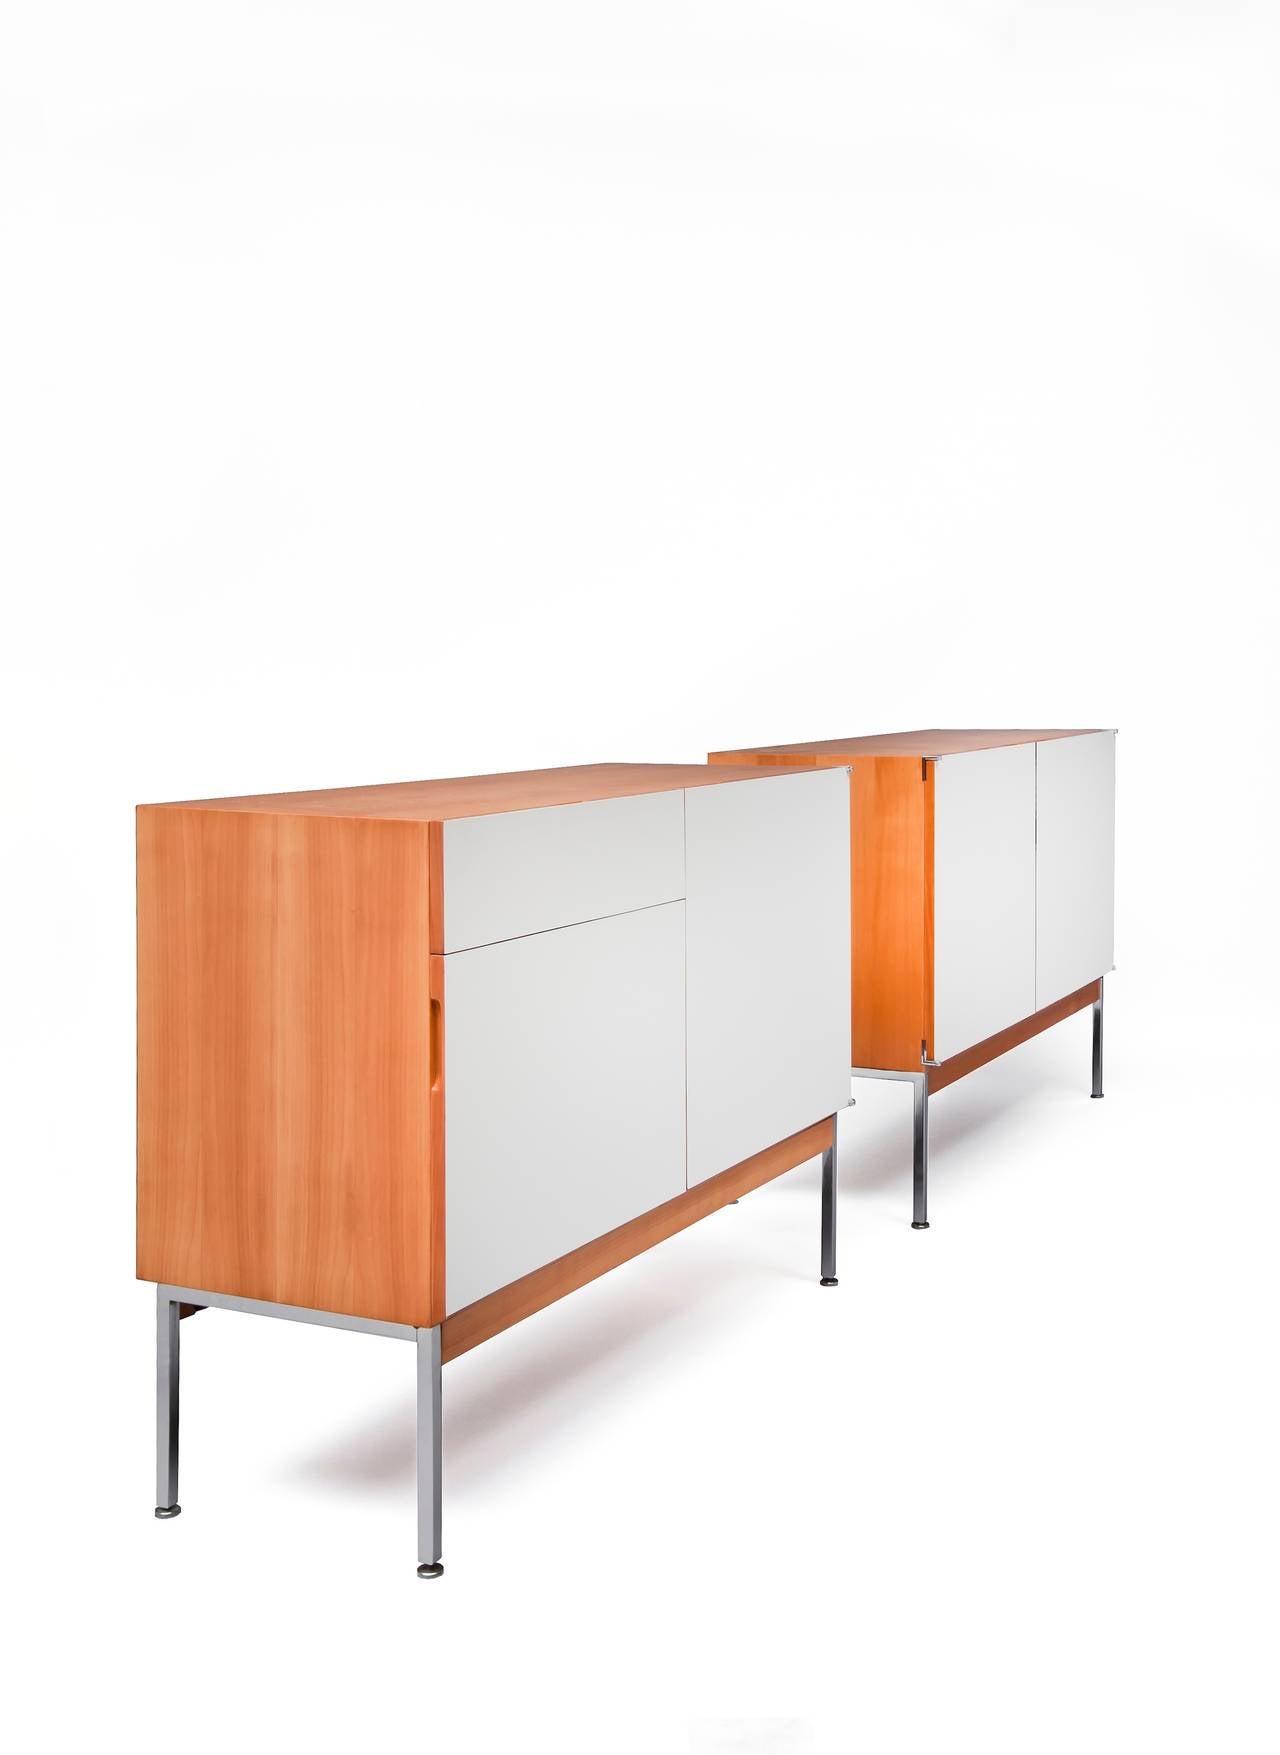 Pair of sideboards by Antoine Philippon (1930-1995) & Jacqueline Lecoq (1932-)
Bofinger RFA edition - 1958.